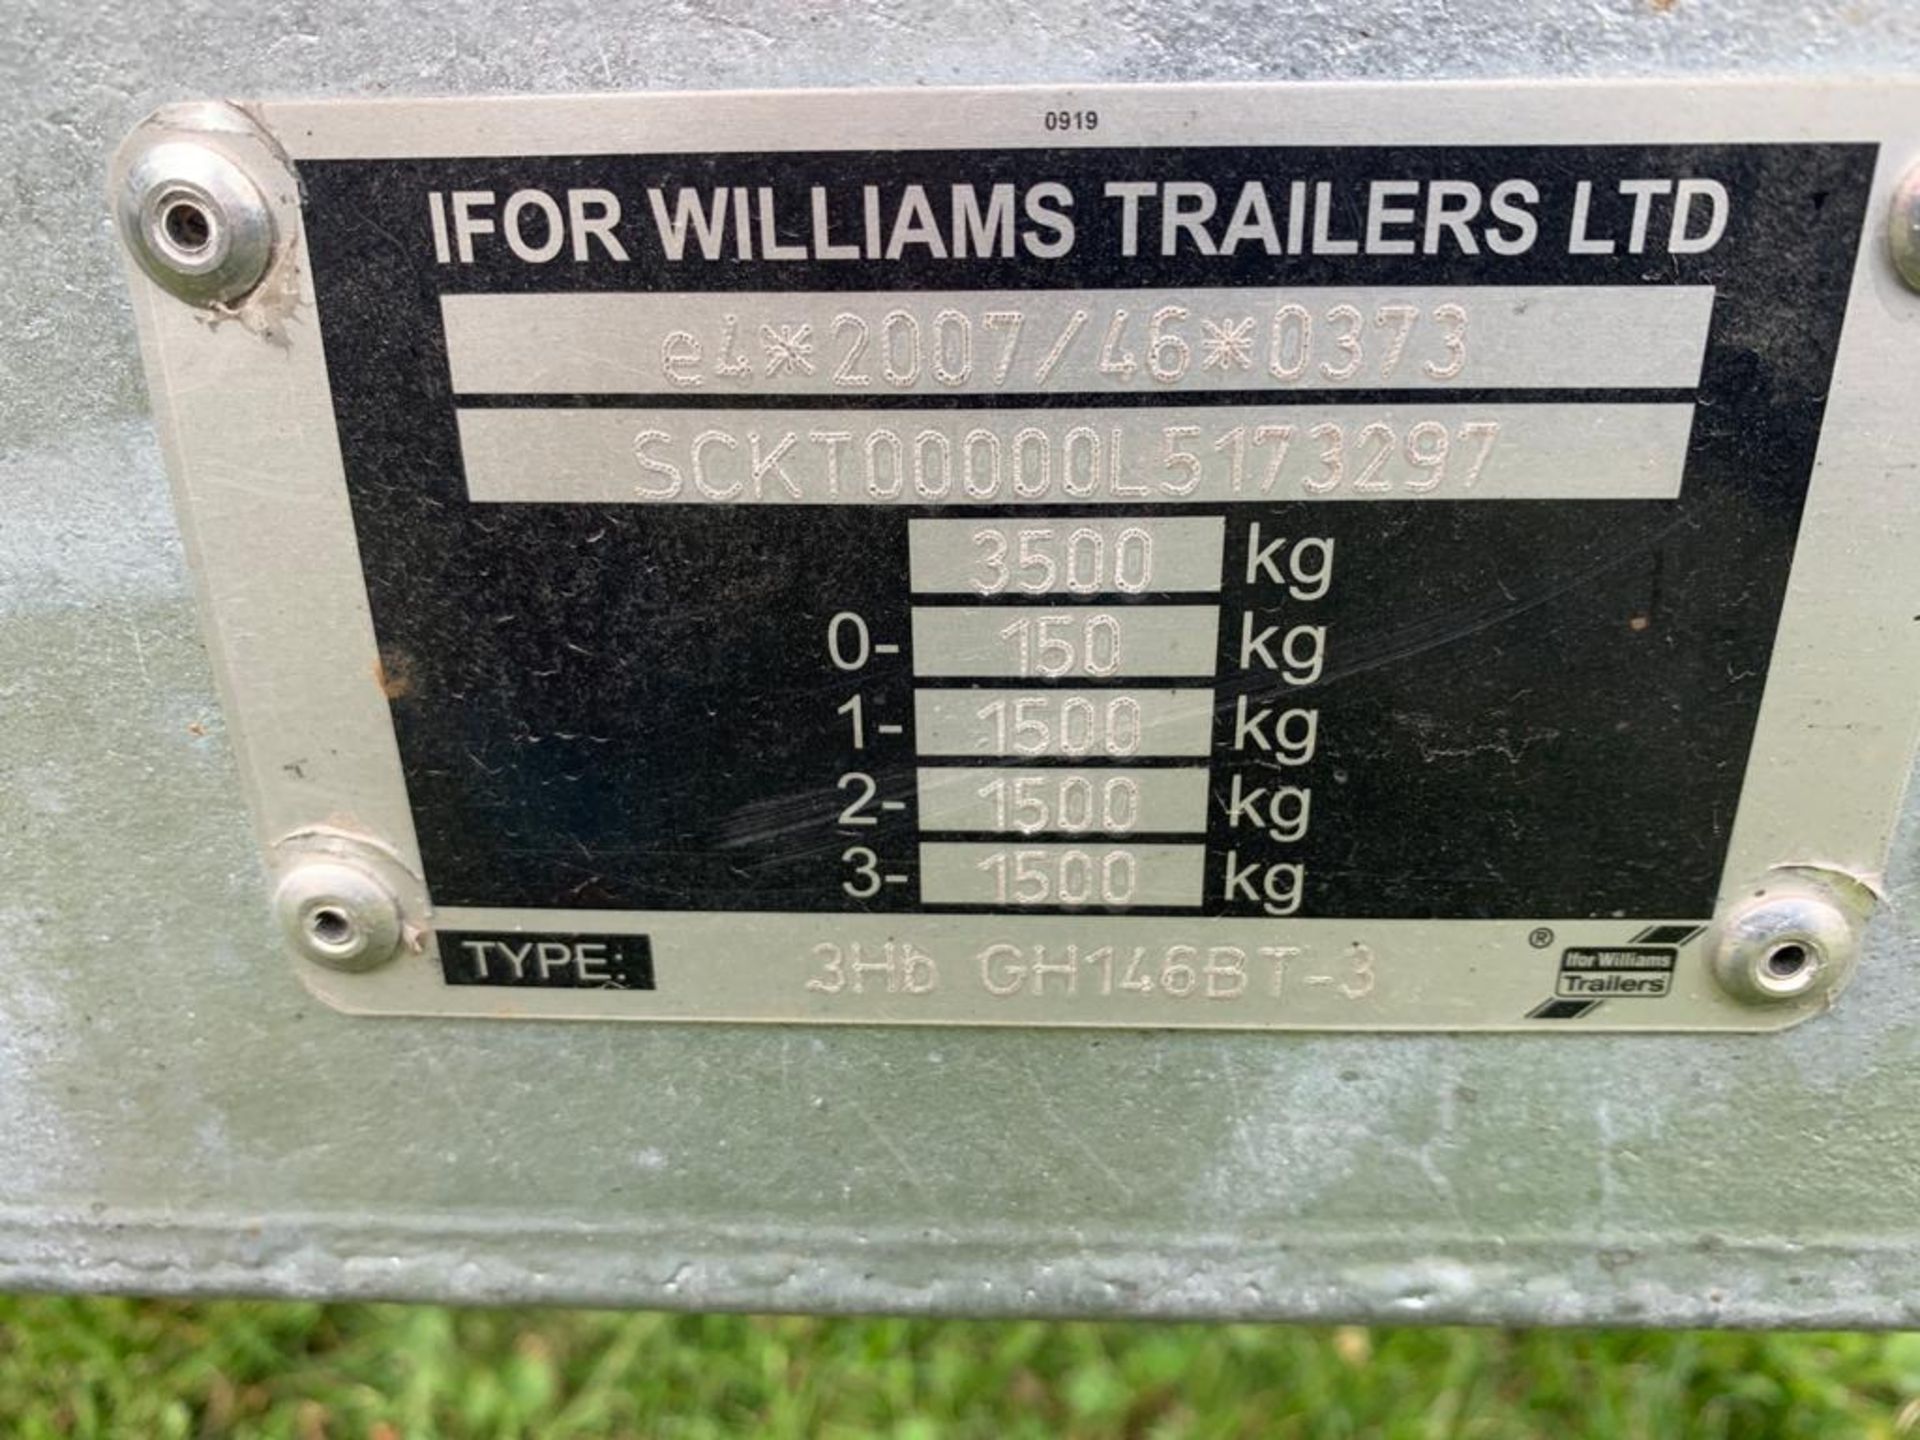 RARE 2020 IFOR WILLIAMS TRI-AXLE TRAILER, GH146BT-3 VERY LITTLE USE 3 WEEKS OLD AS NEW CONDITION - Image 3 of 3